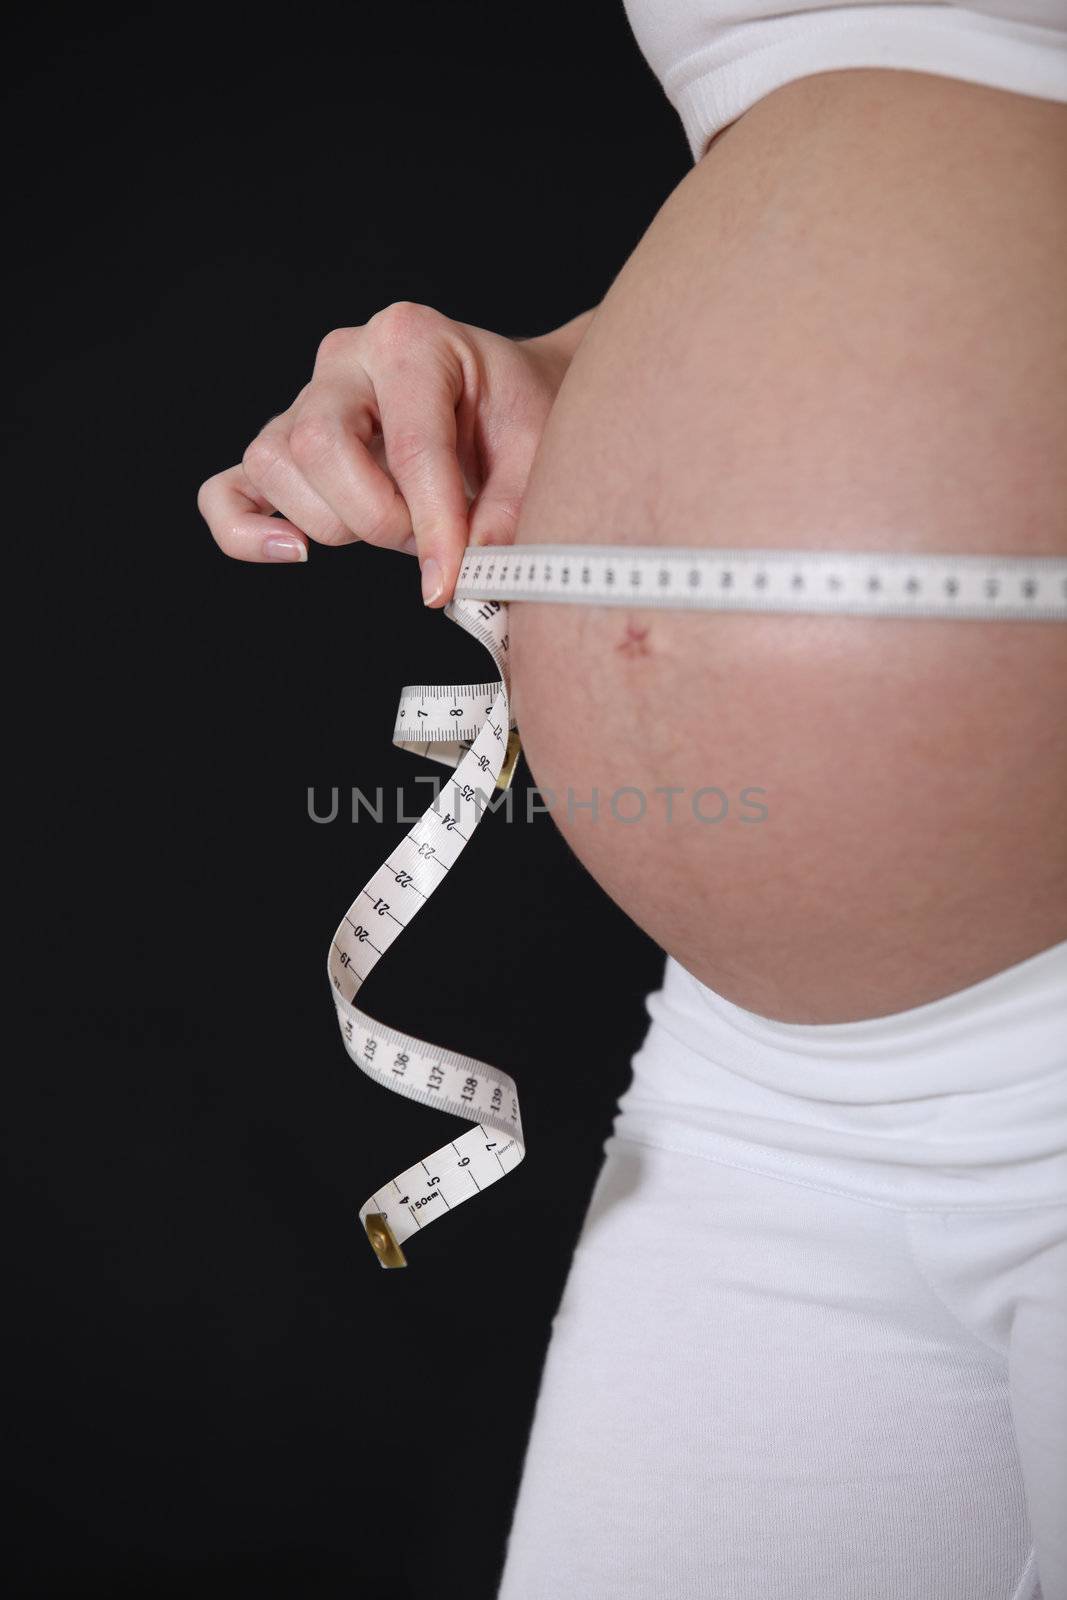 Pregnant lady measuring belly by phovoir